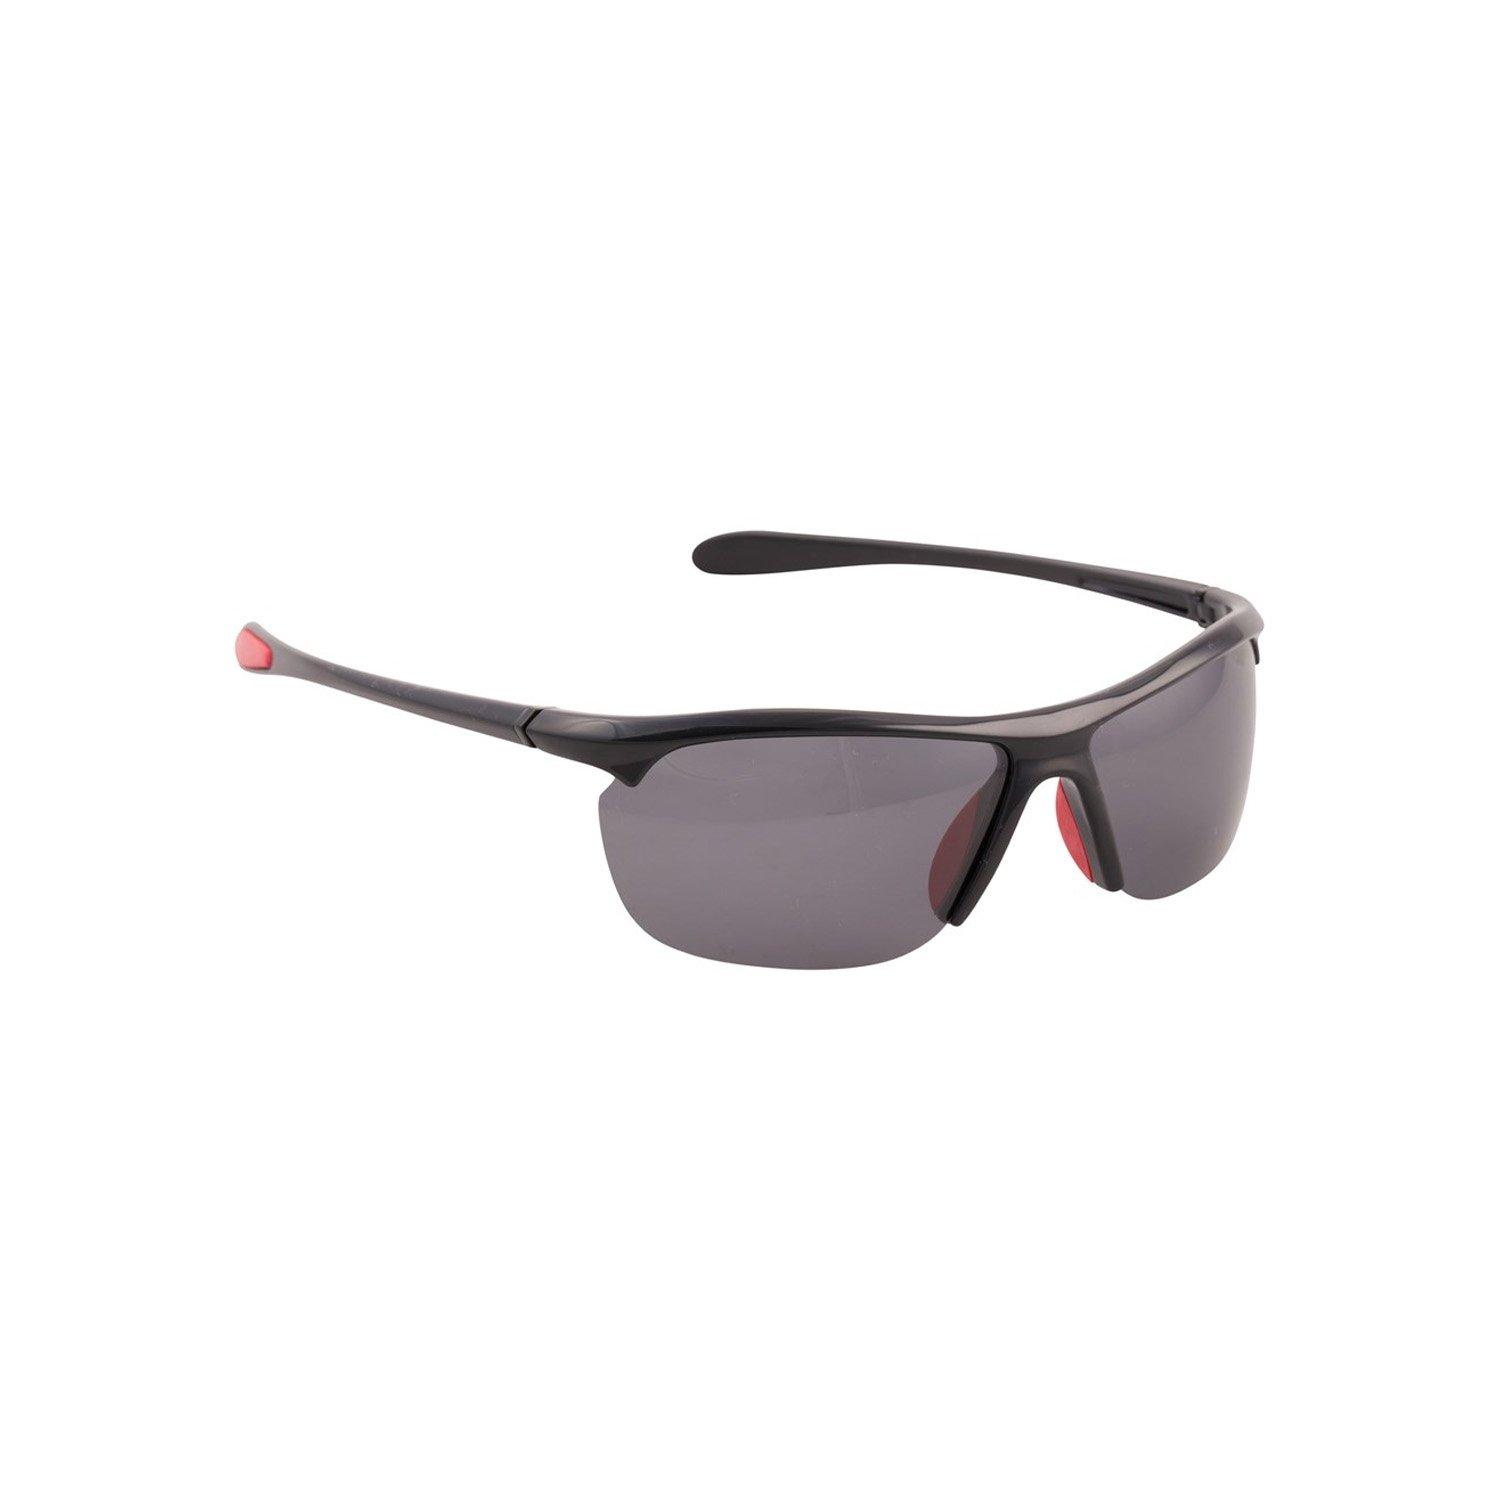 Mountain Warehouse  Sonnenbrille Mablethorpe 